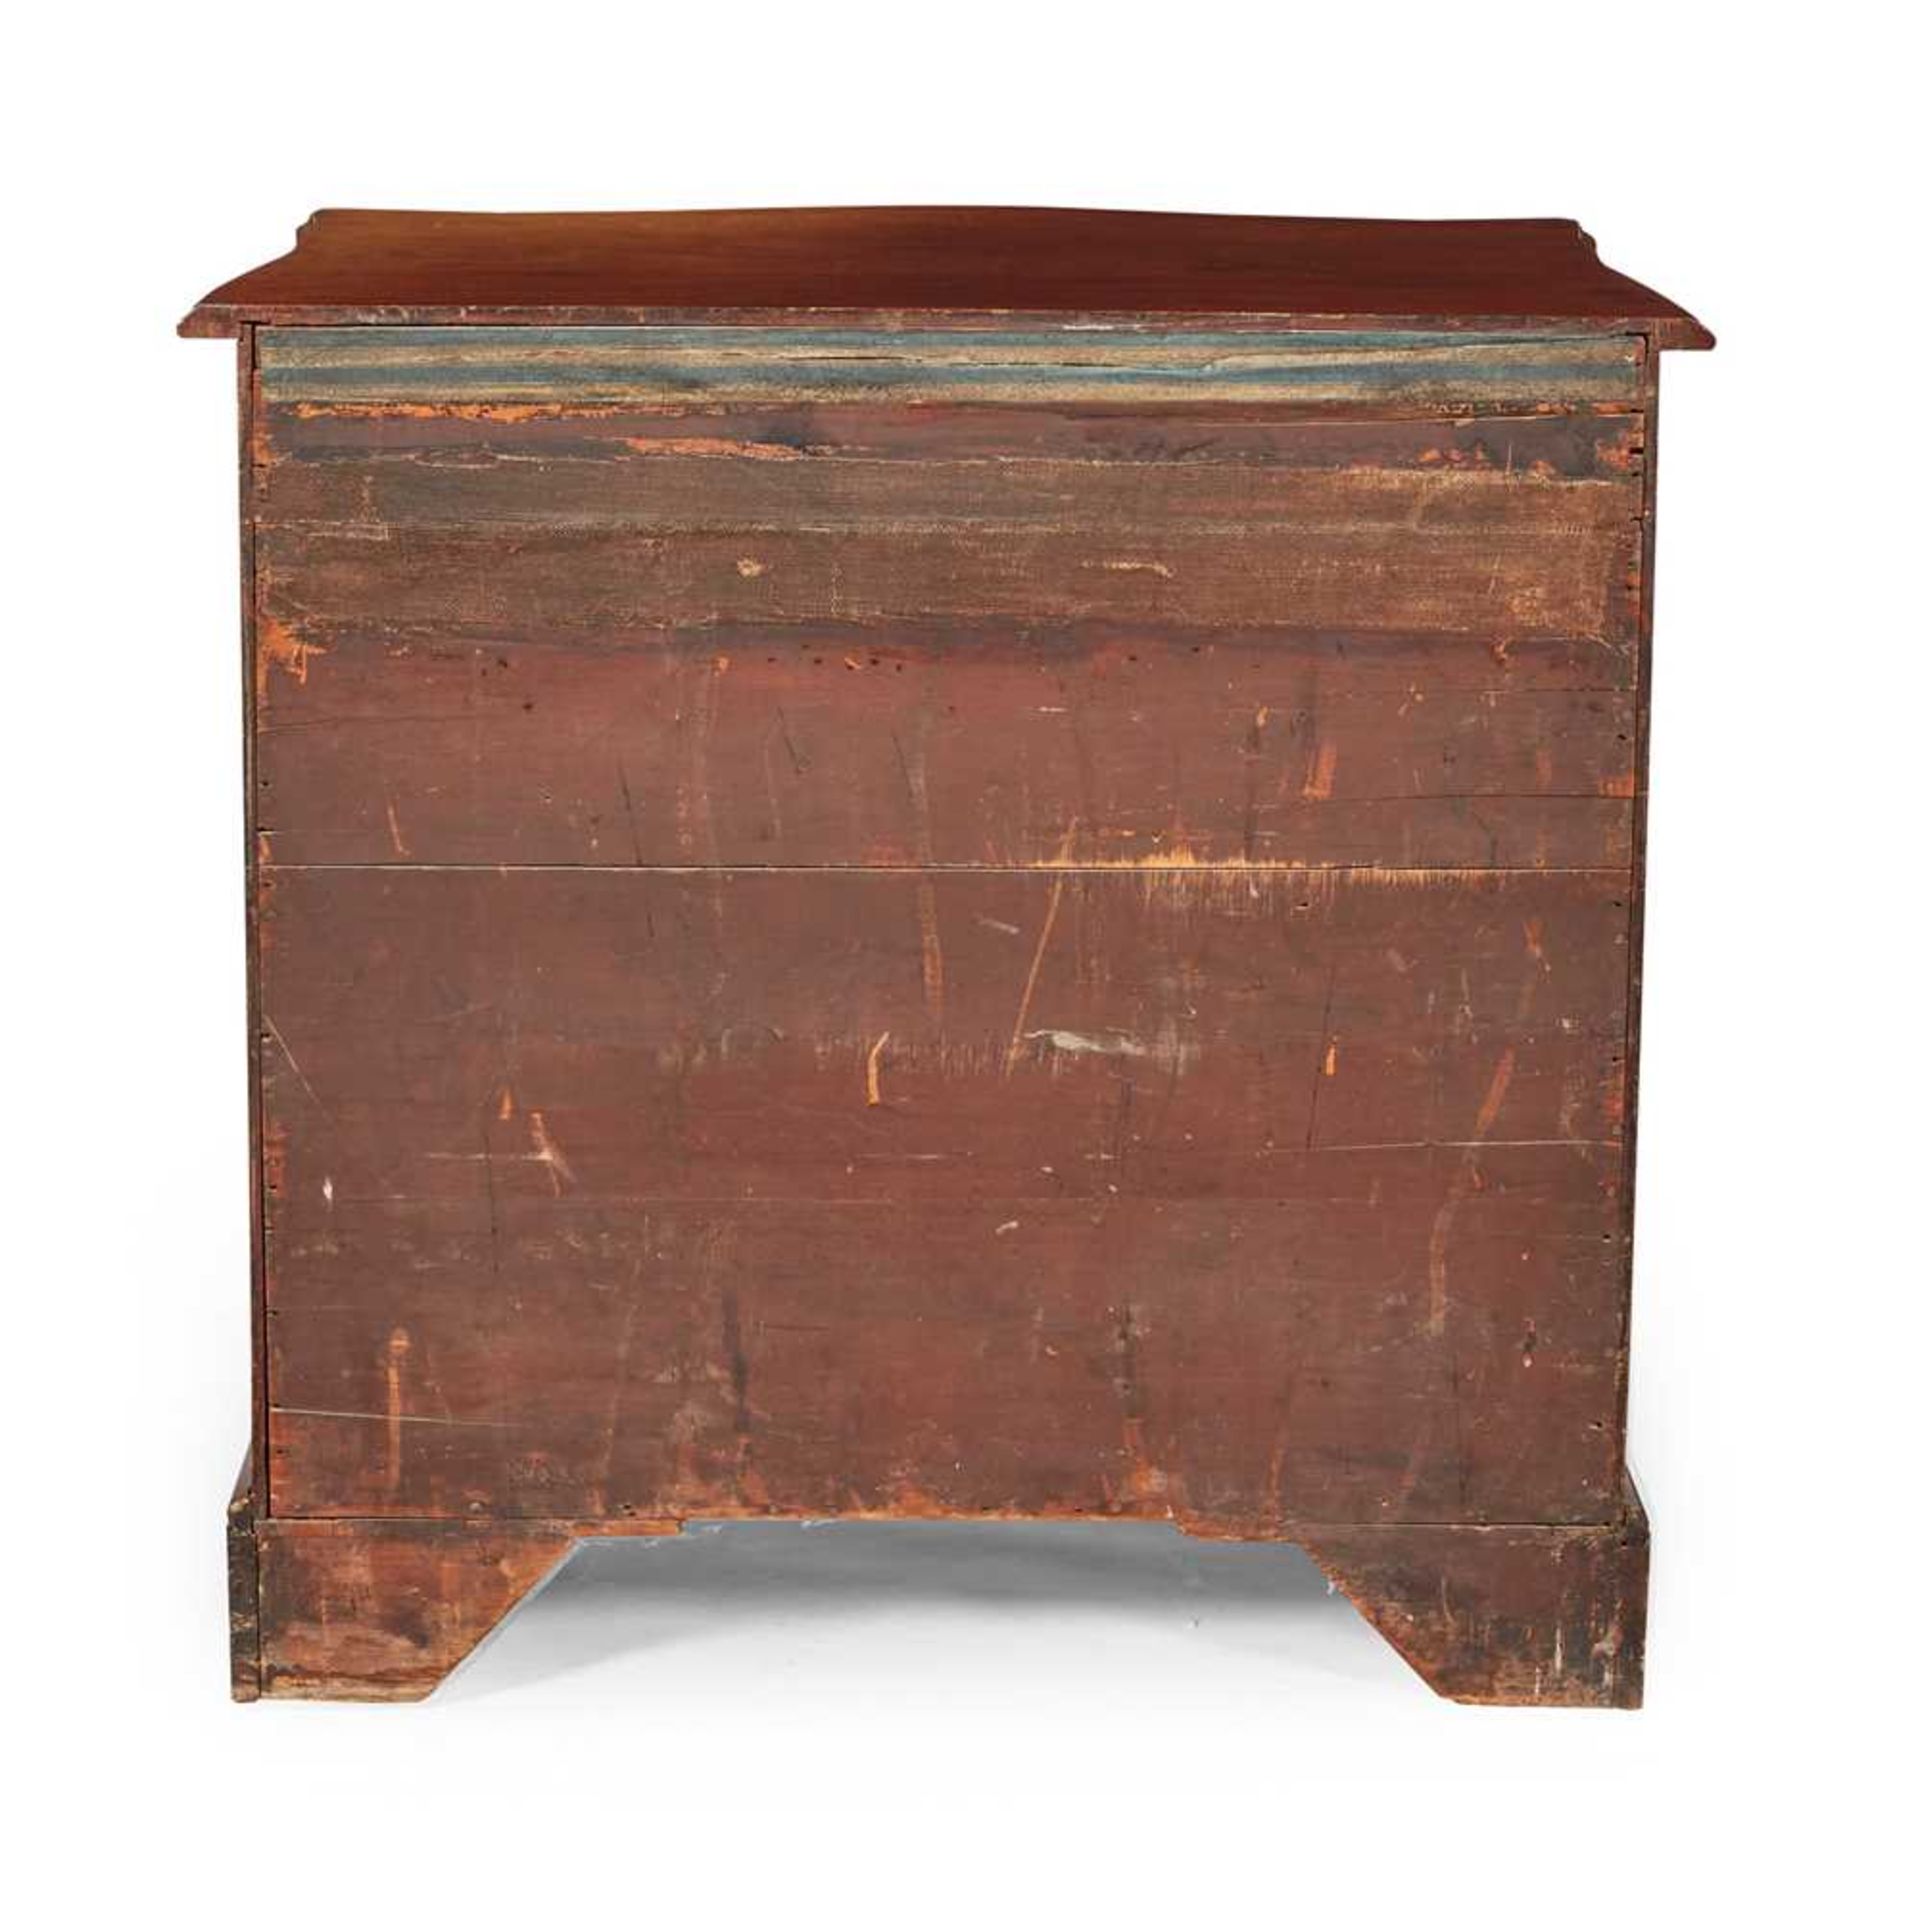 GEORGE III MAHOGANY SERPENTINE CHEST OF DRAWERS 18TH CENTURY - Image 3 of 3